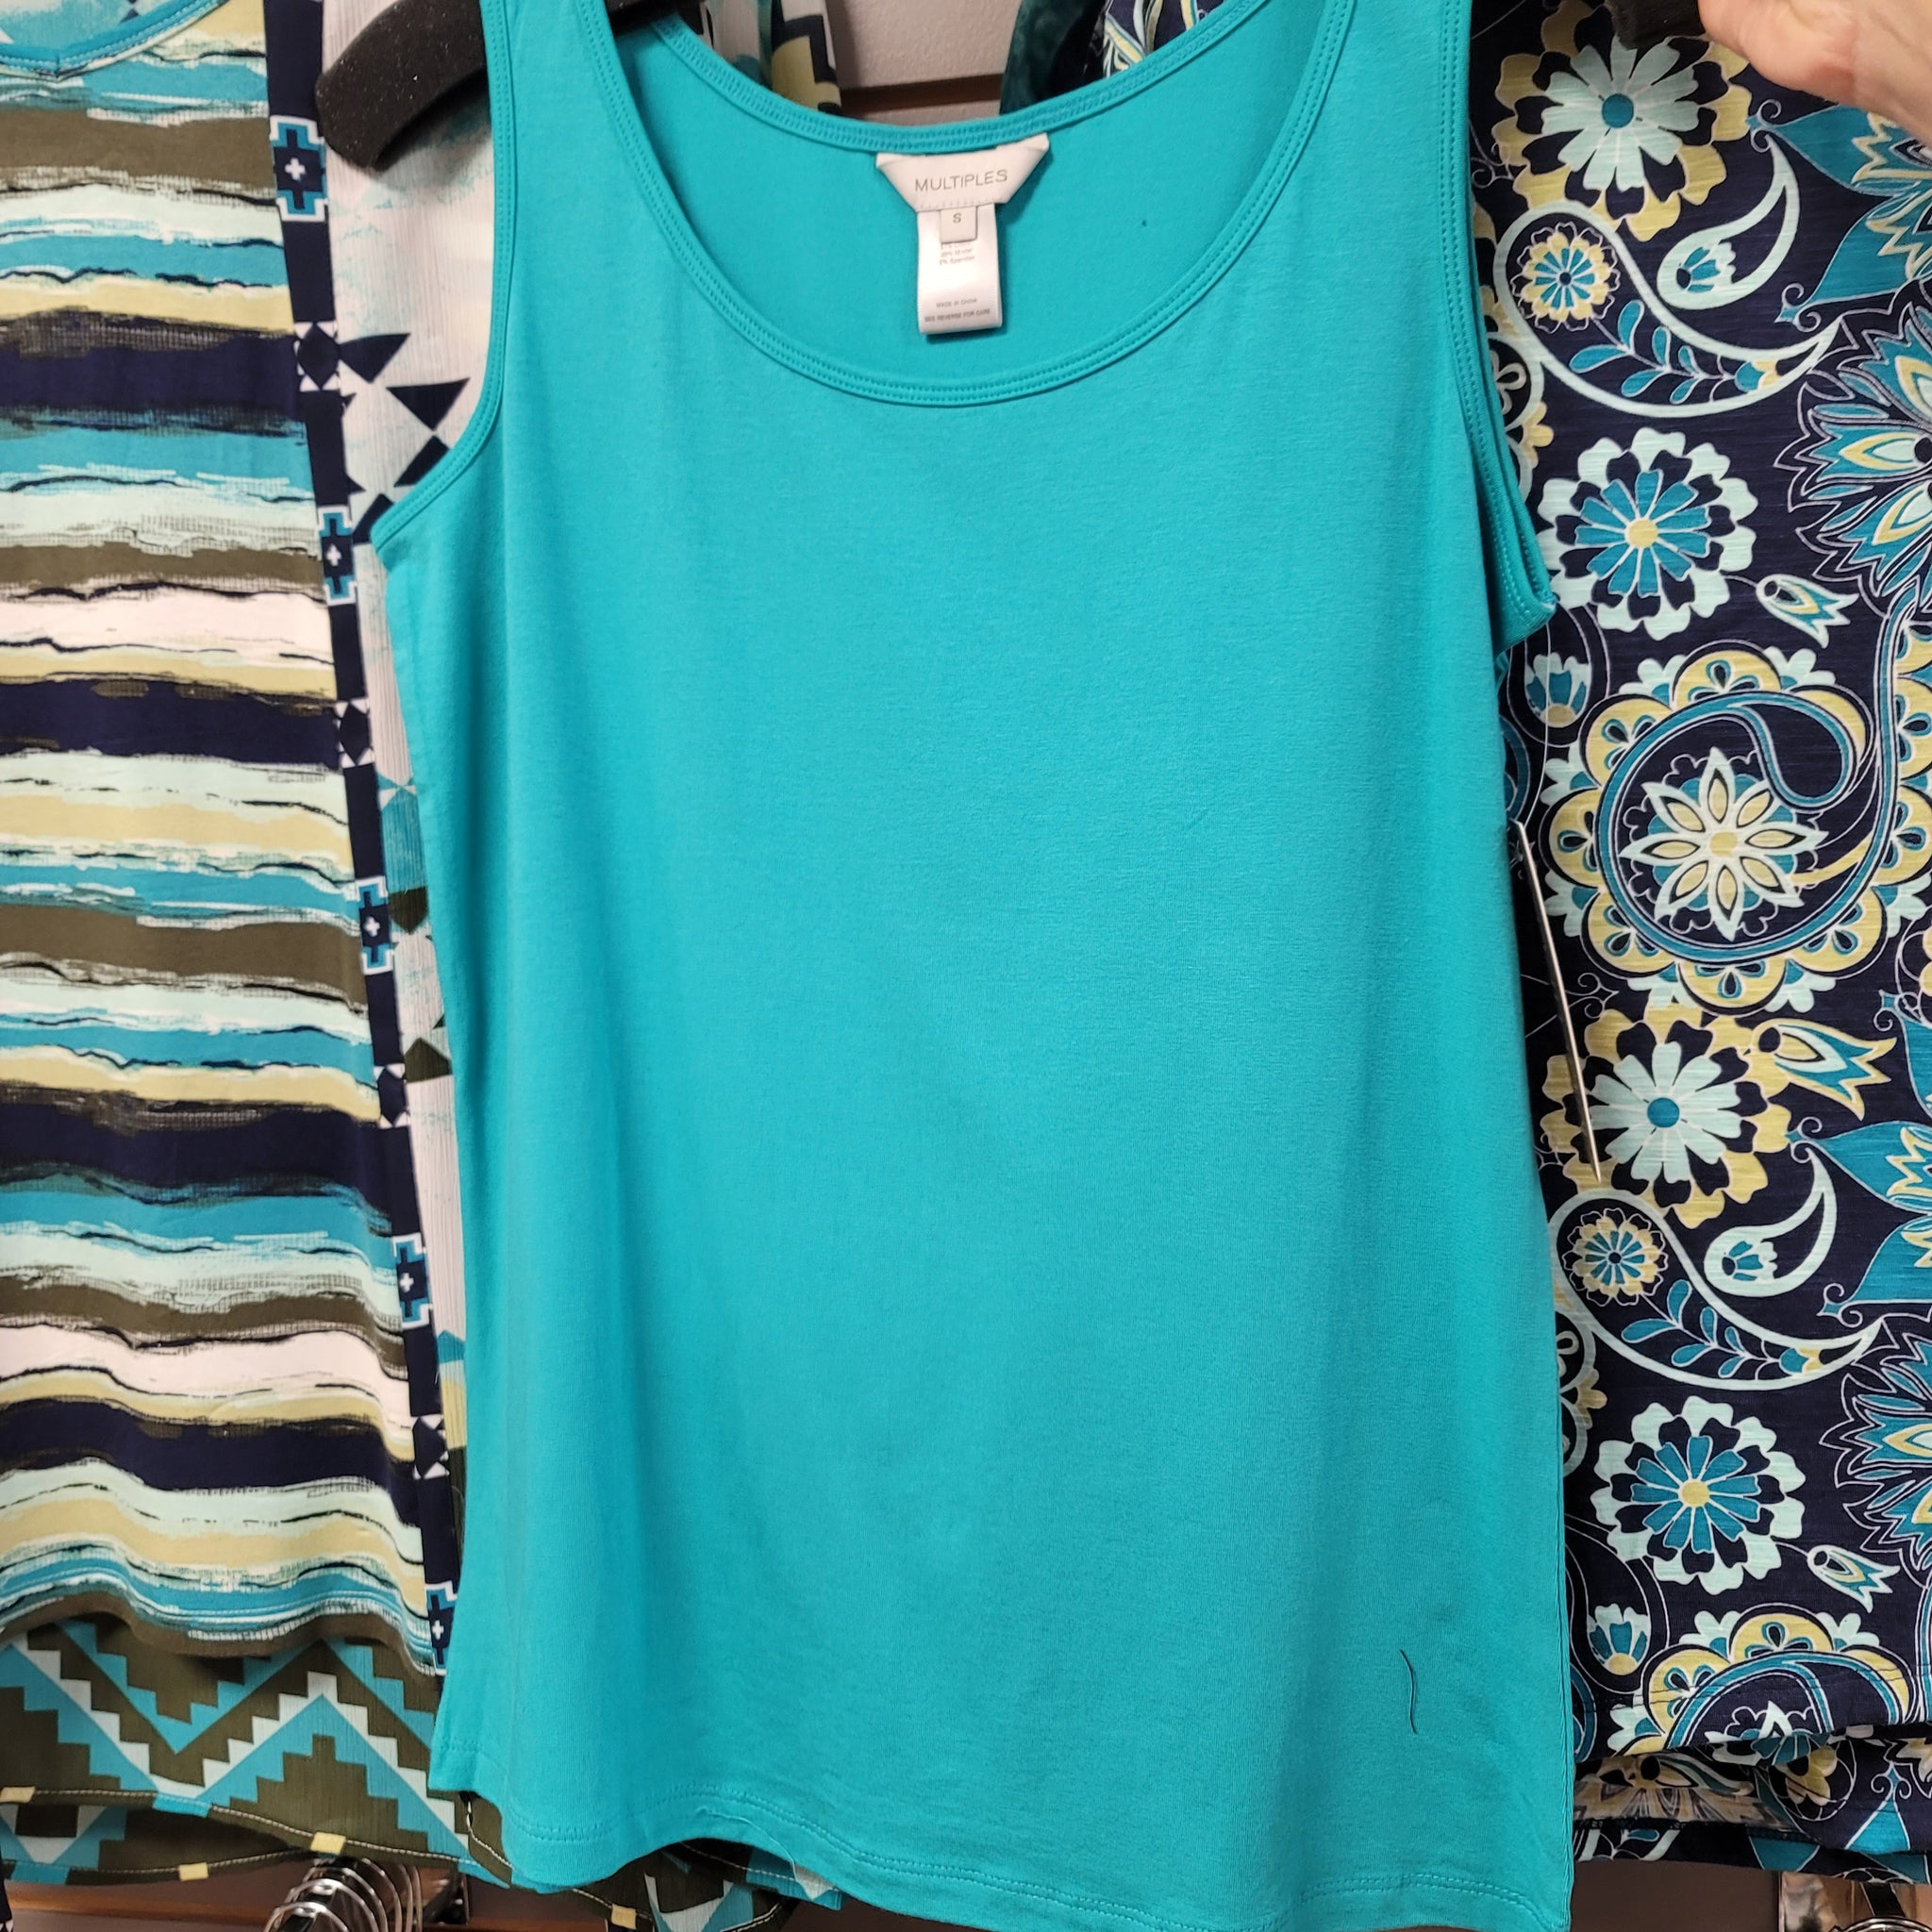 Multiples Basic Scoop Neck Teal-Turquoise Tank